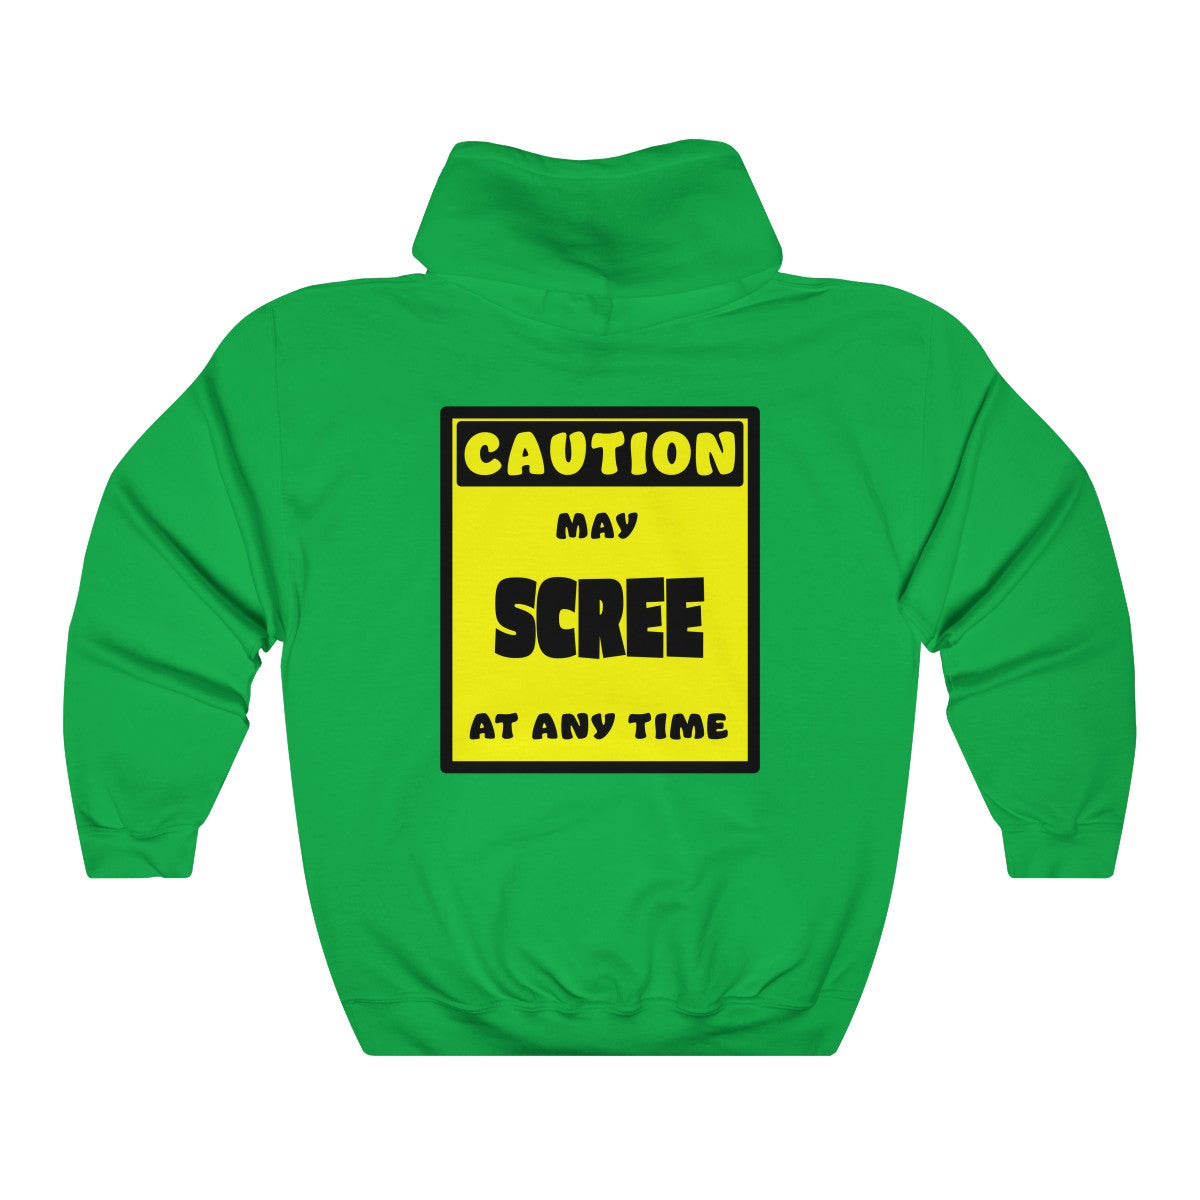 CAUTION! May SCREE at any time! - Hoodie Hoodie AFLT-Whootorca Green S 